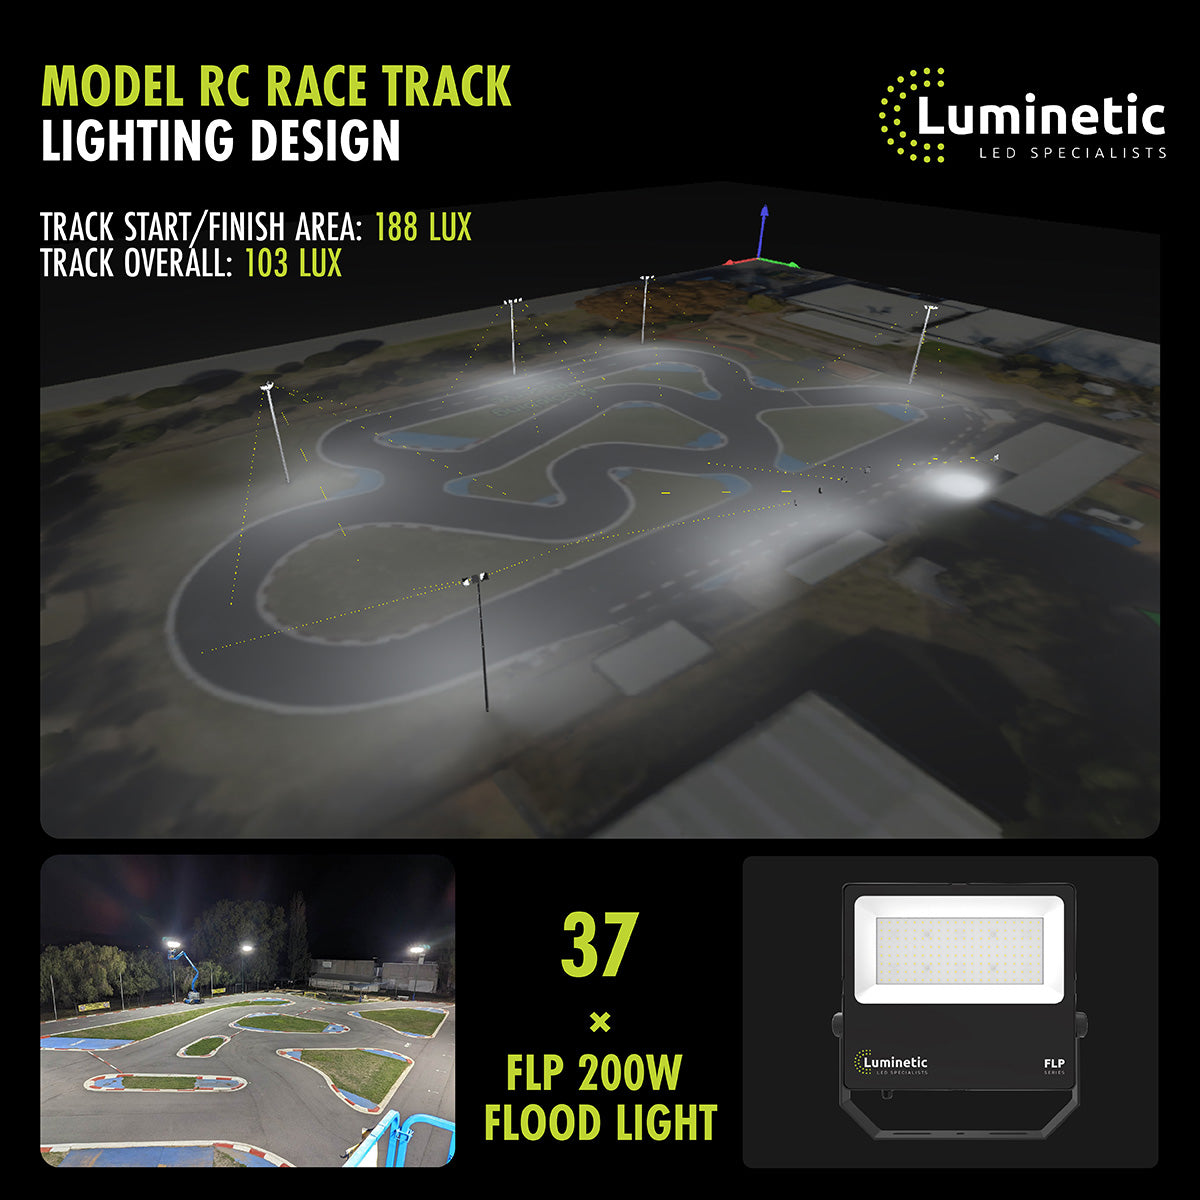 Lighting design for remote-control race track